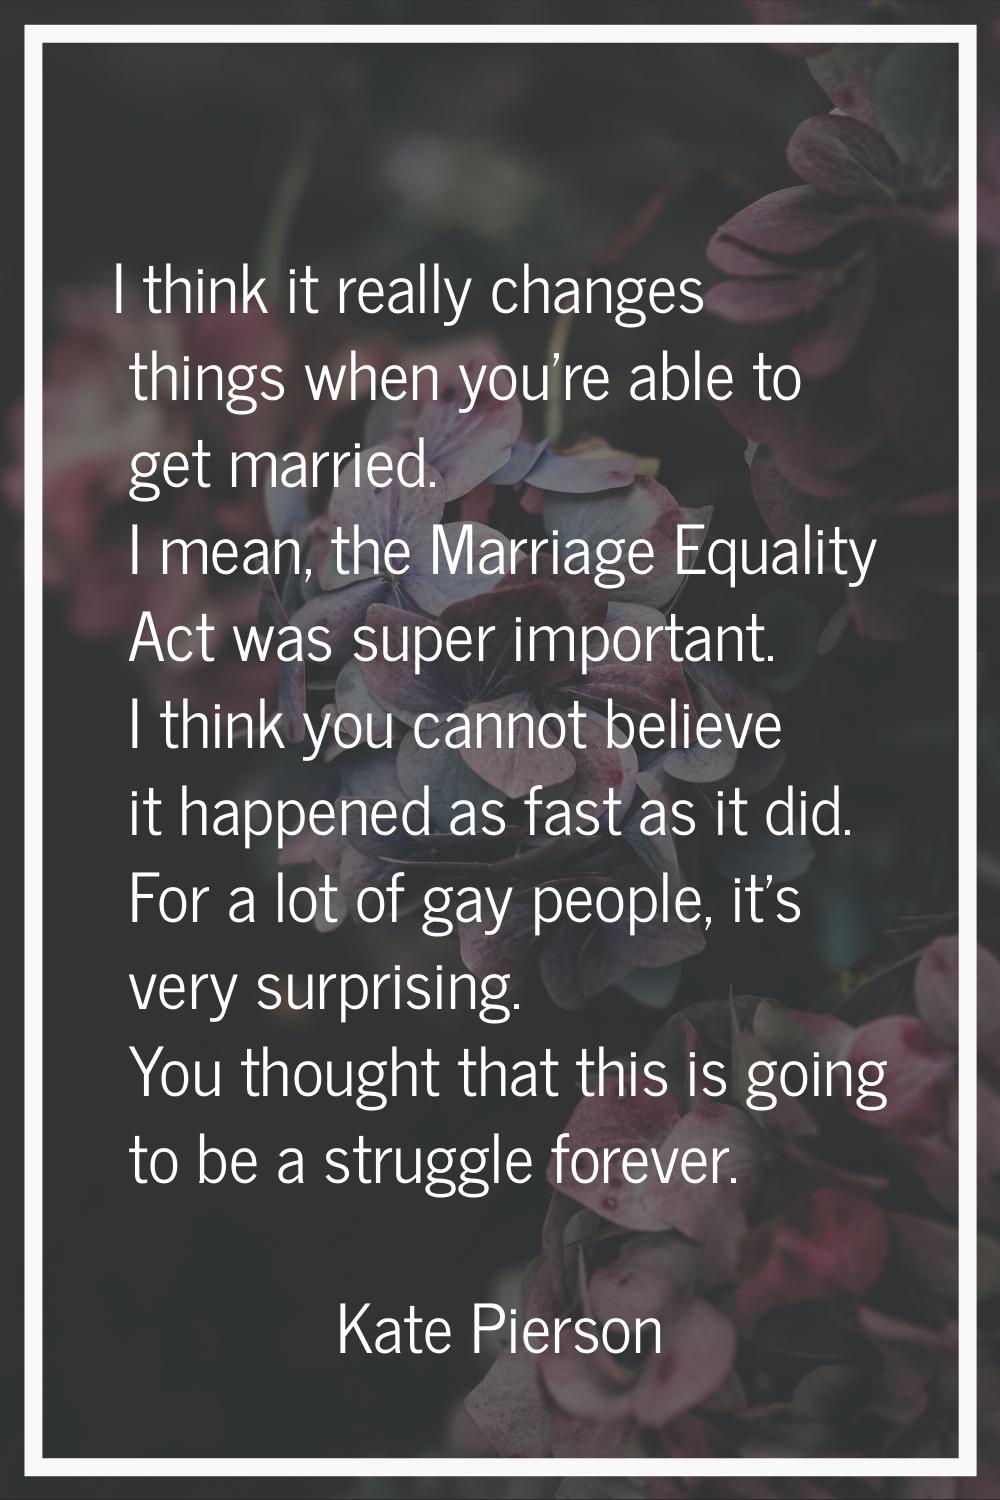 I think it really changes things when you're able to get married. I mean, the Marriage Equality Act